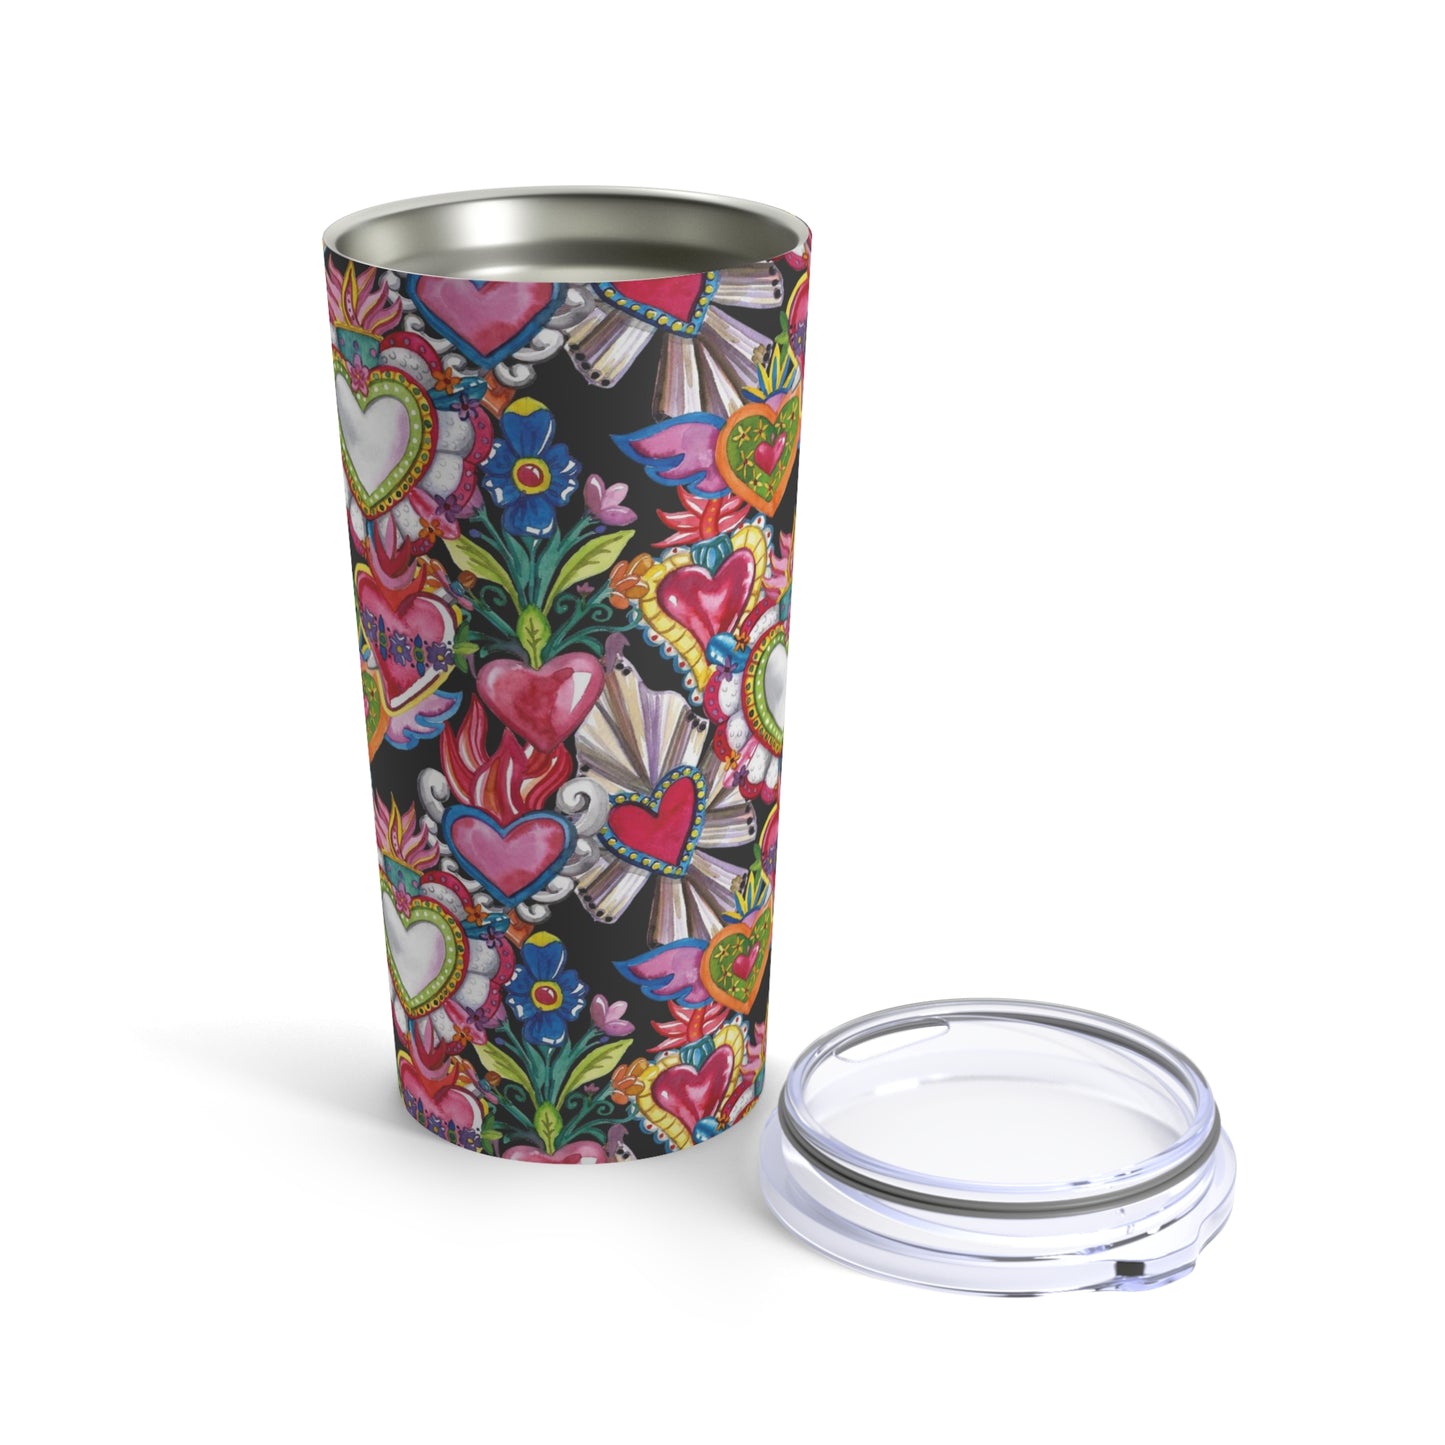 Sacred hearts tumbler 20oz. Stainless tumbler with Mexican folk art